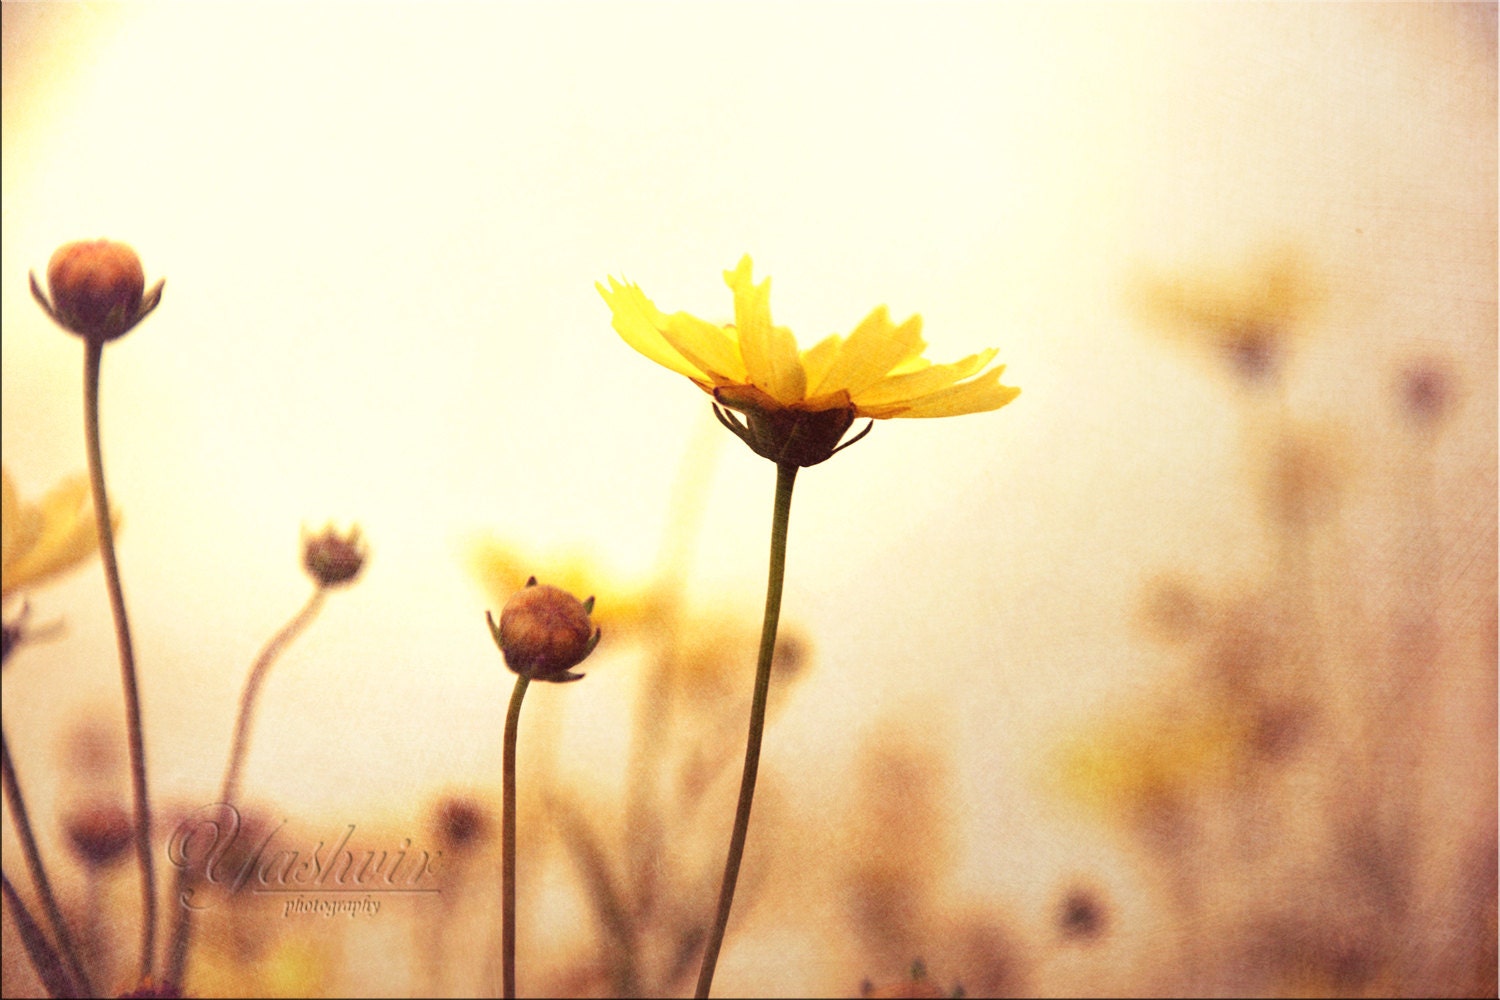 Dreamy Day - Photography print of flowers.  Enchanted and romantic. Yellow and white, wall art, home decor - Yashvir